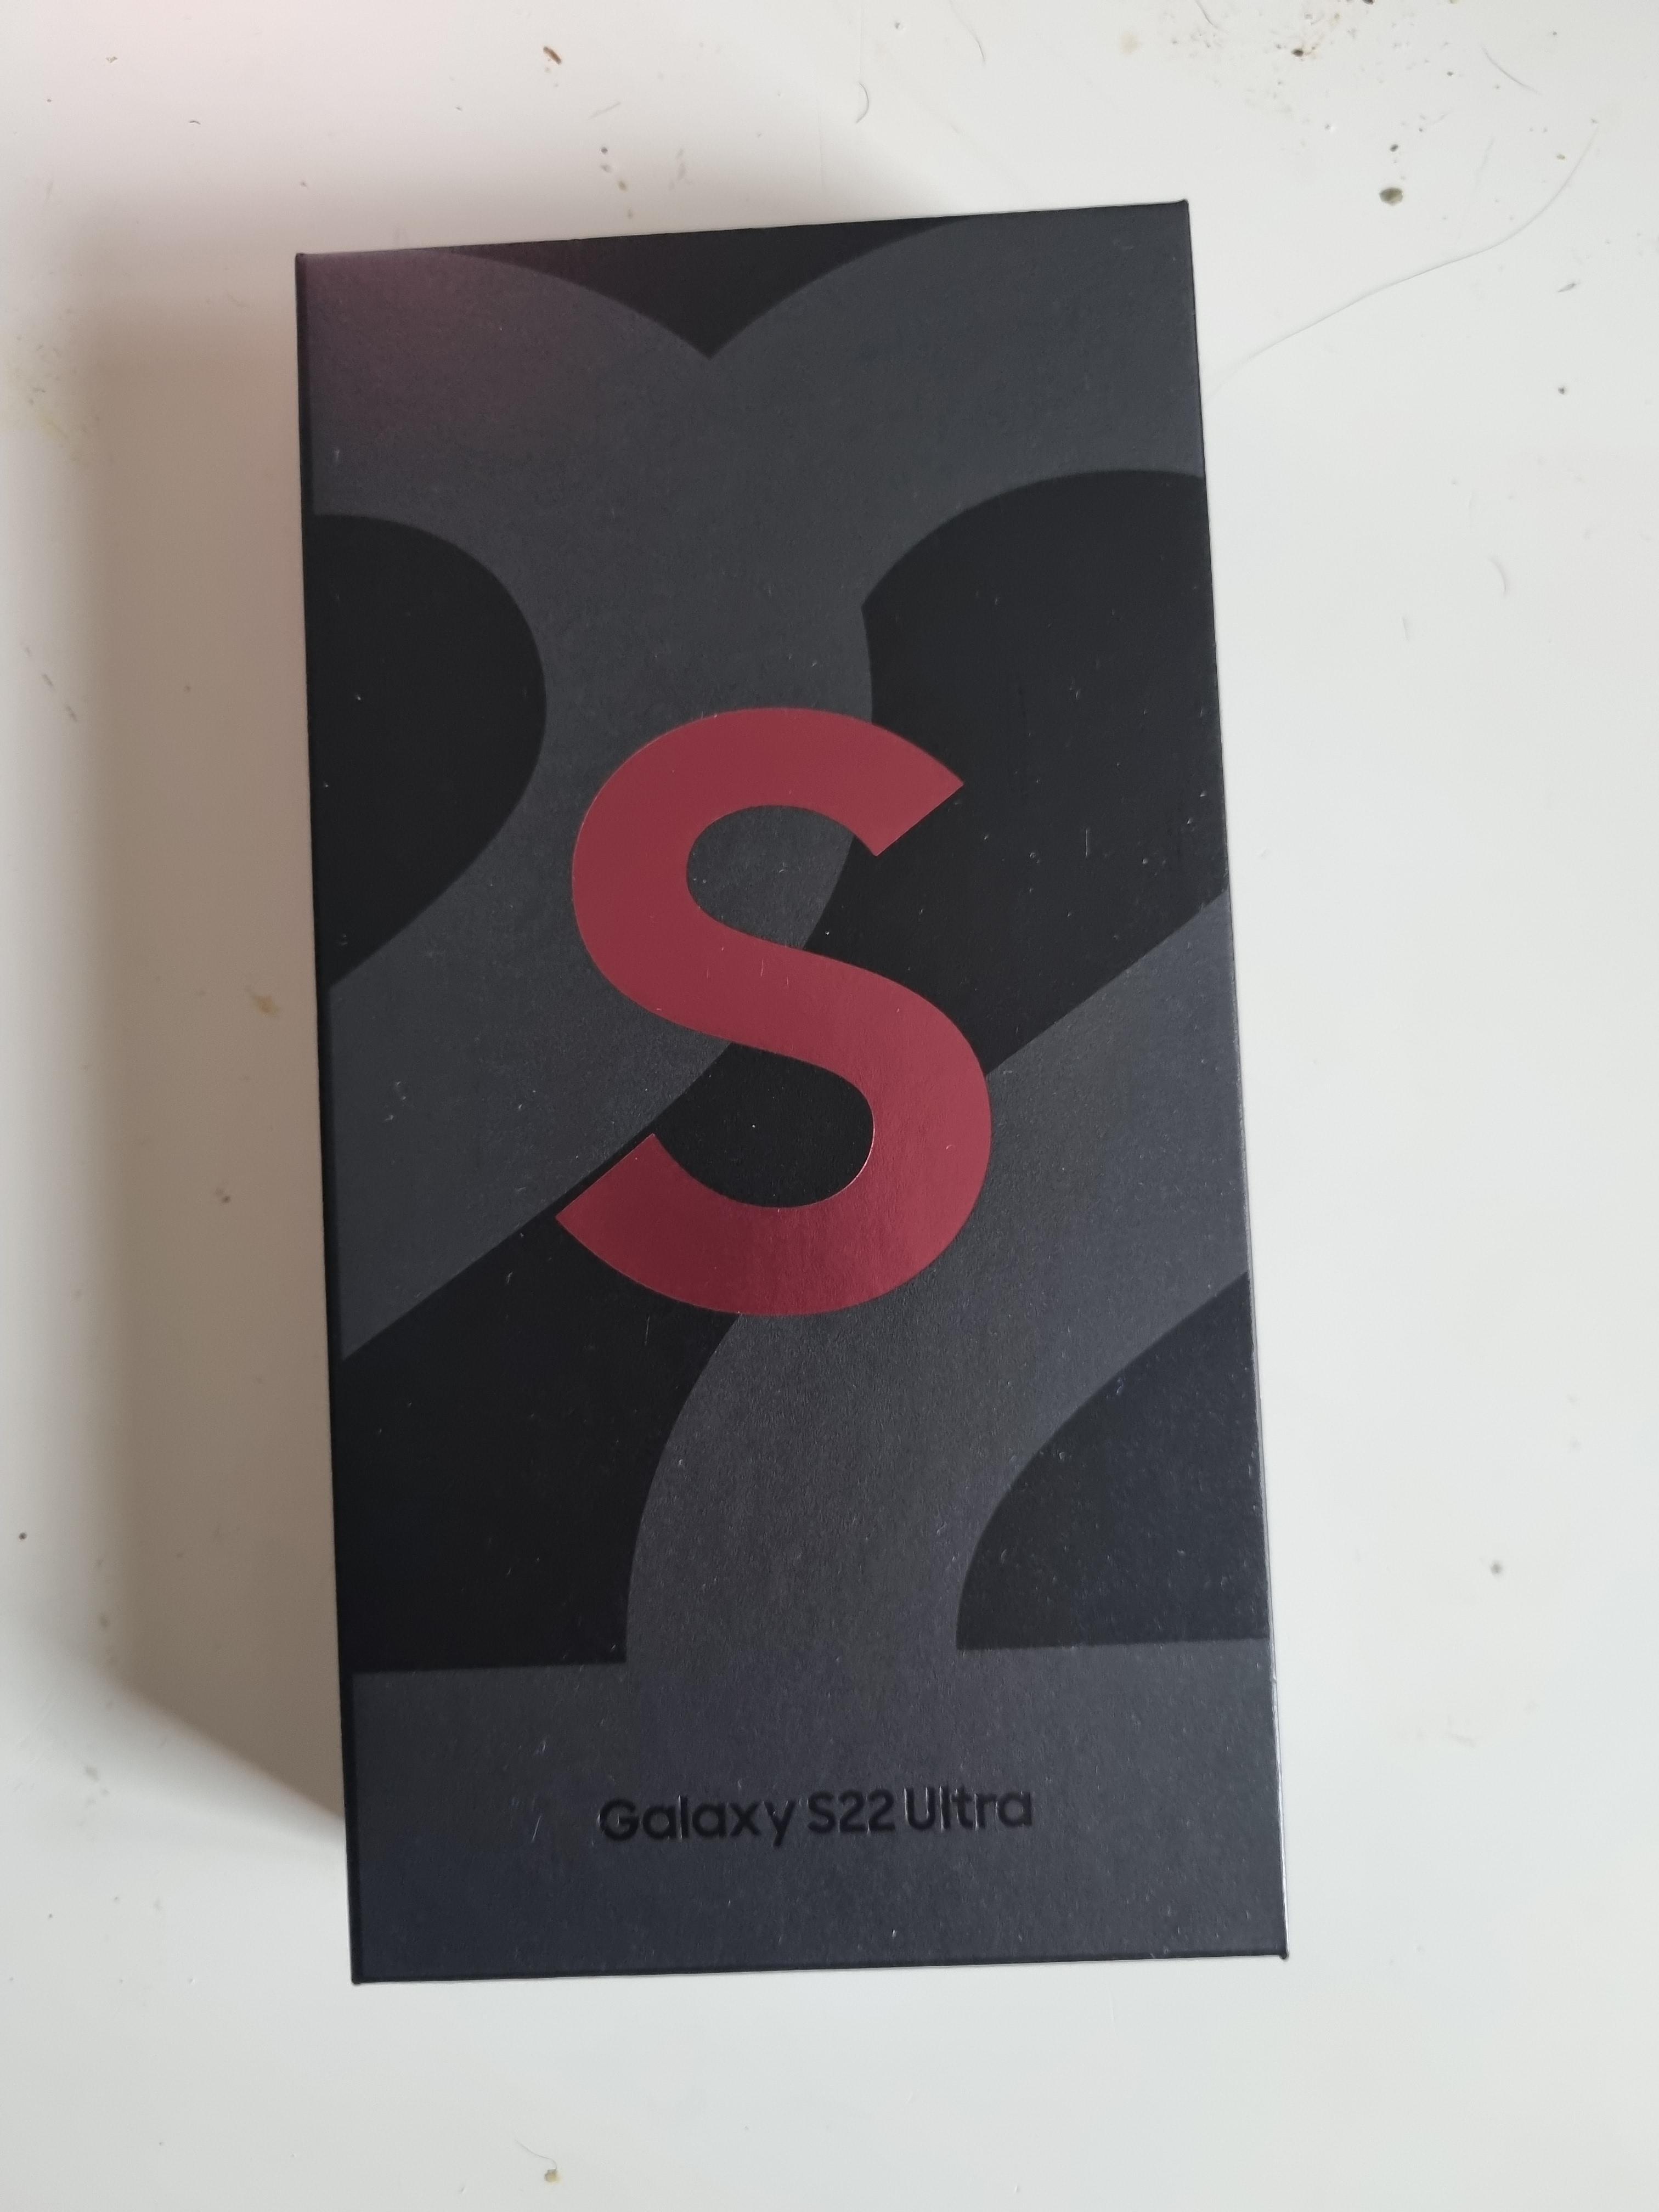 The aforementioned Redditor in France was already shipped his Galaxy S22 Ultra in this box - Galaxy S22 Ultra starts arriving on doorsteps